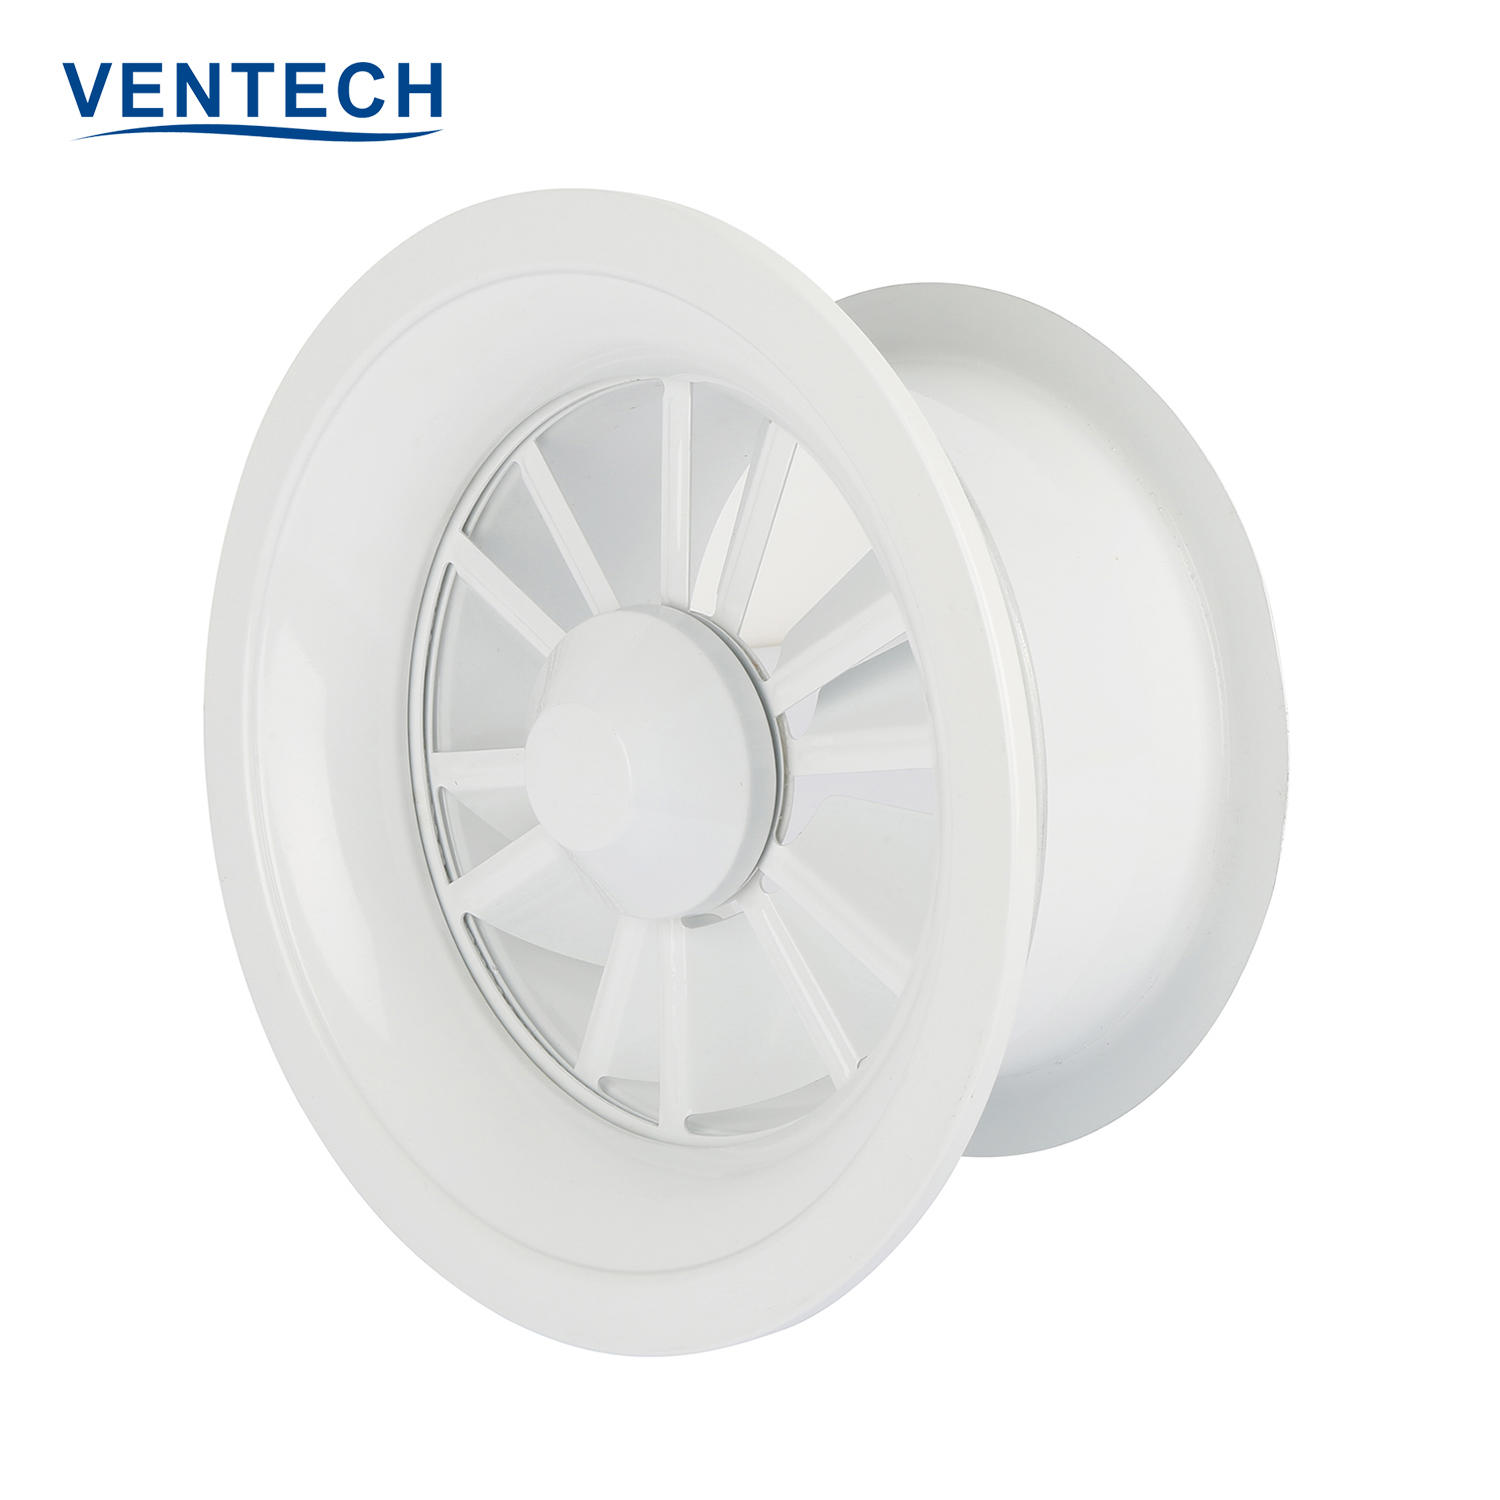 Hvac Air Vent Registers Round High Quality Adjustable Swril Round Ceiling Air Diffuser